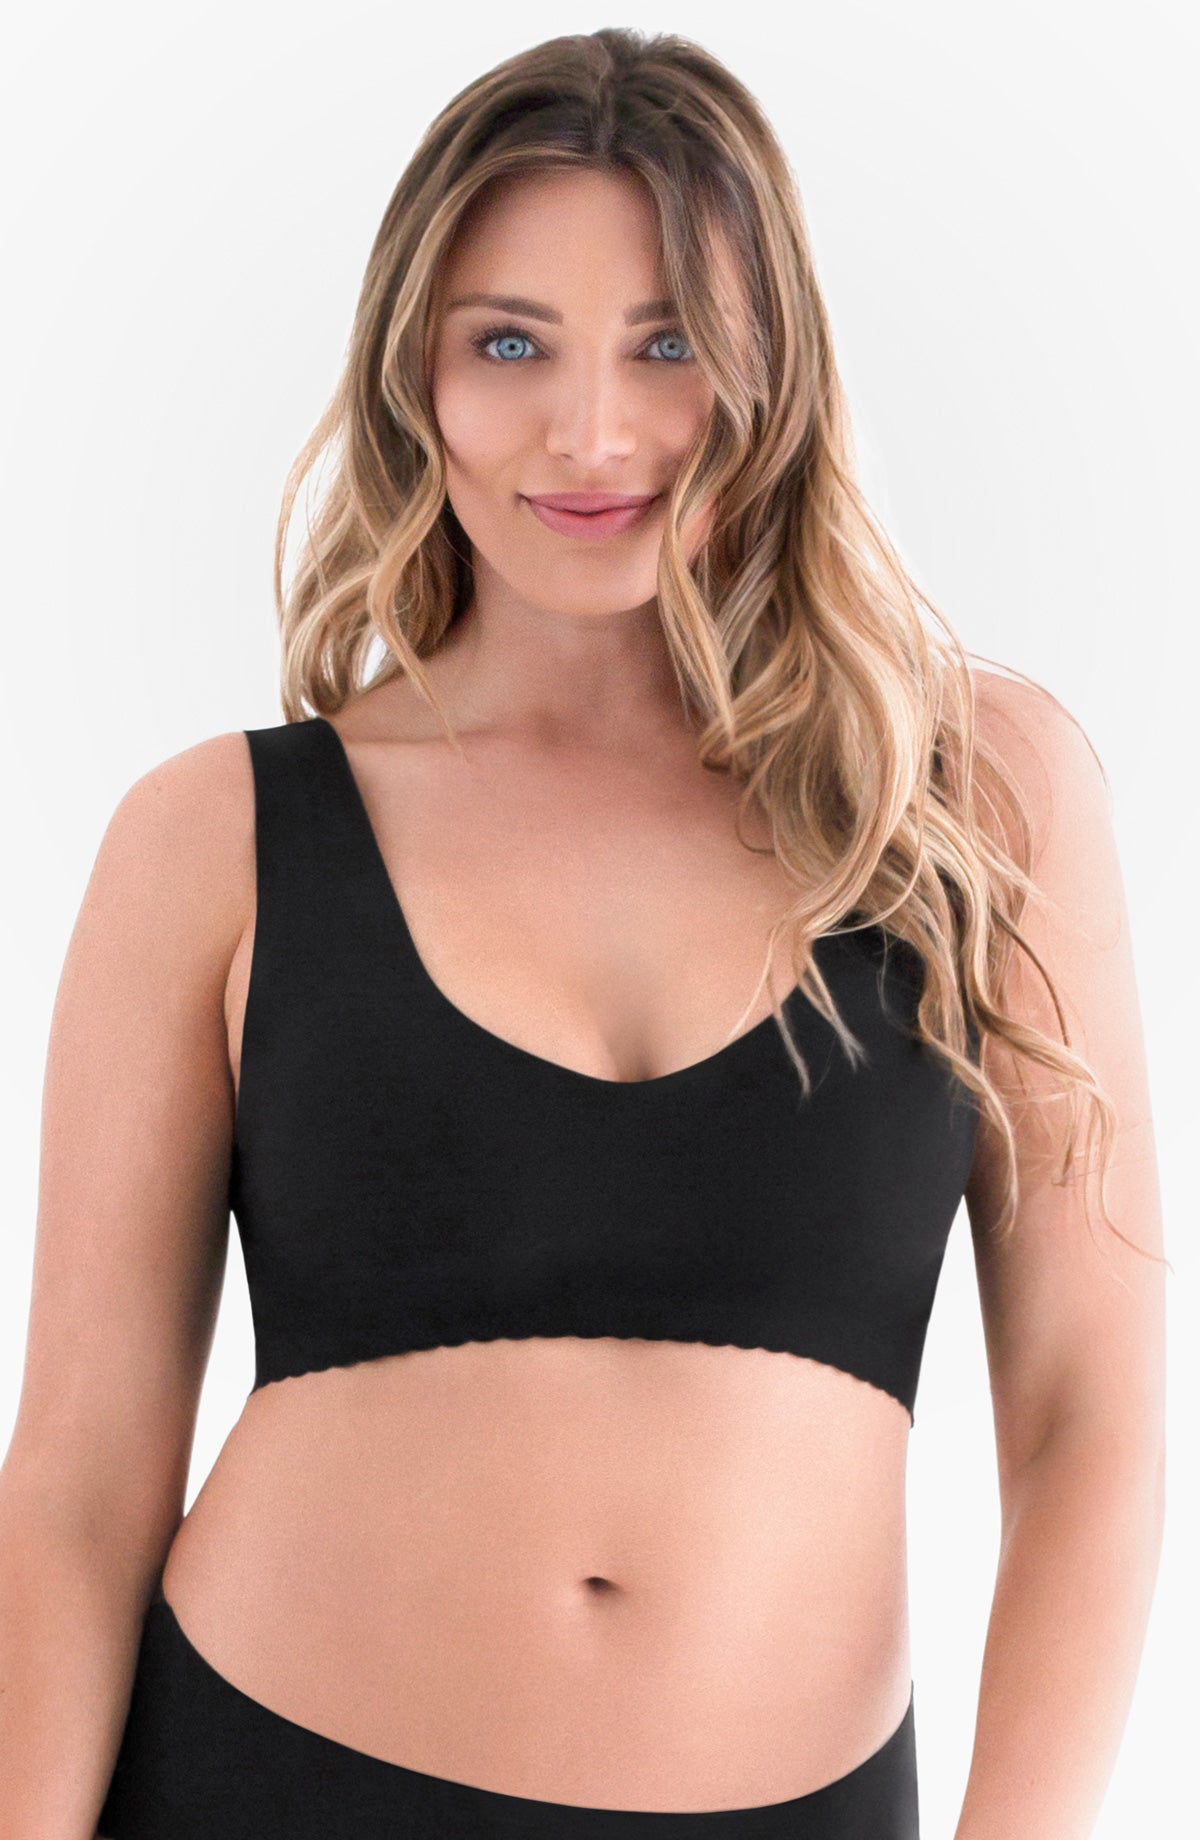 A sports bra you can trust 👏 What else could you want? ✨ shop at